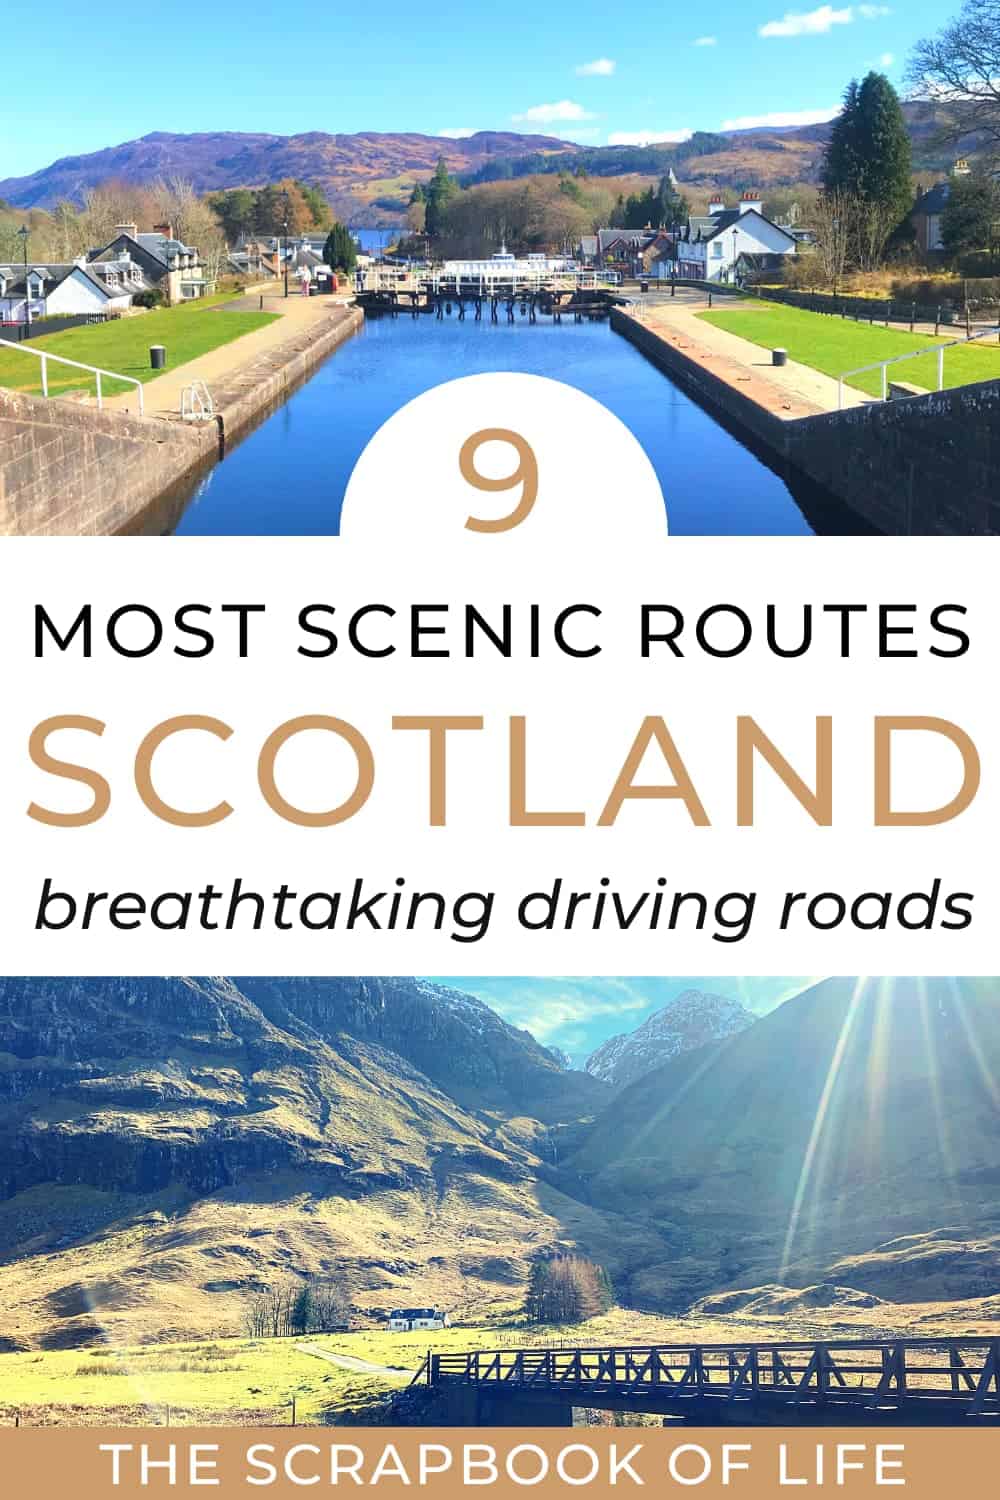 9 Most Scenic Routes In Scotland - Best Roads In The Scottish Highlands!